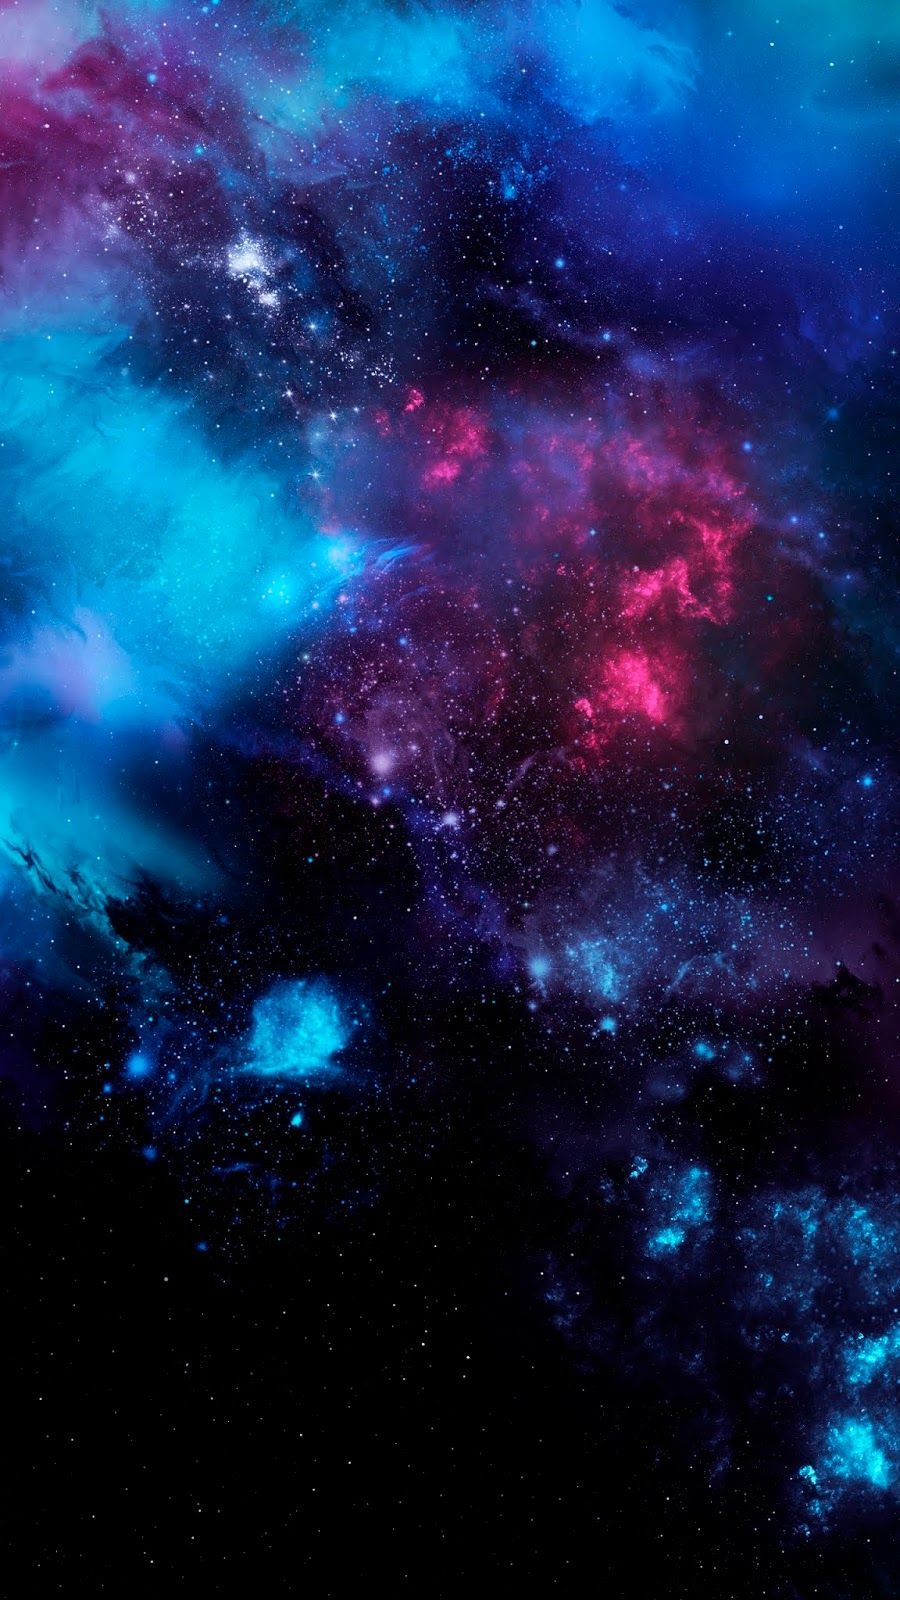 Space wallpaper for Amoled display. Wallpaper space